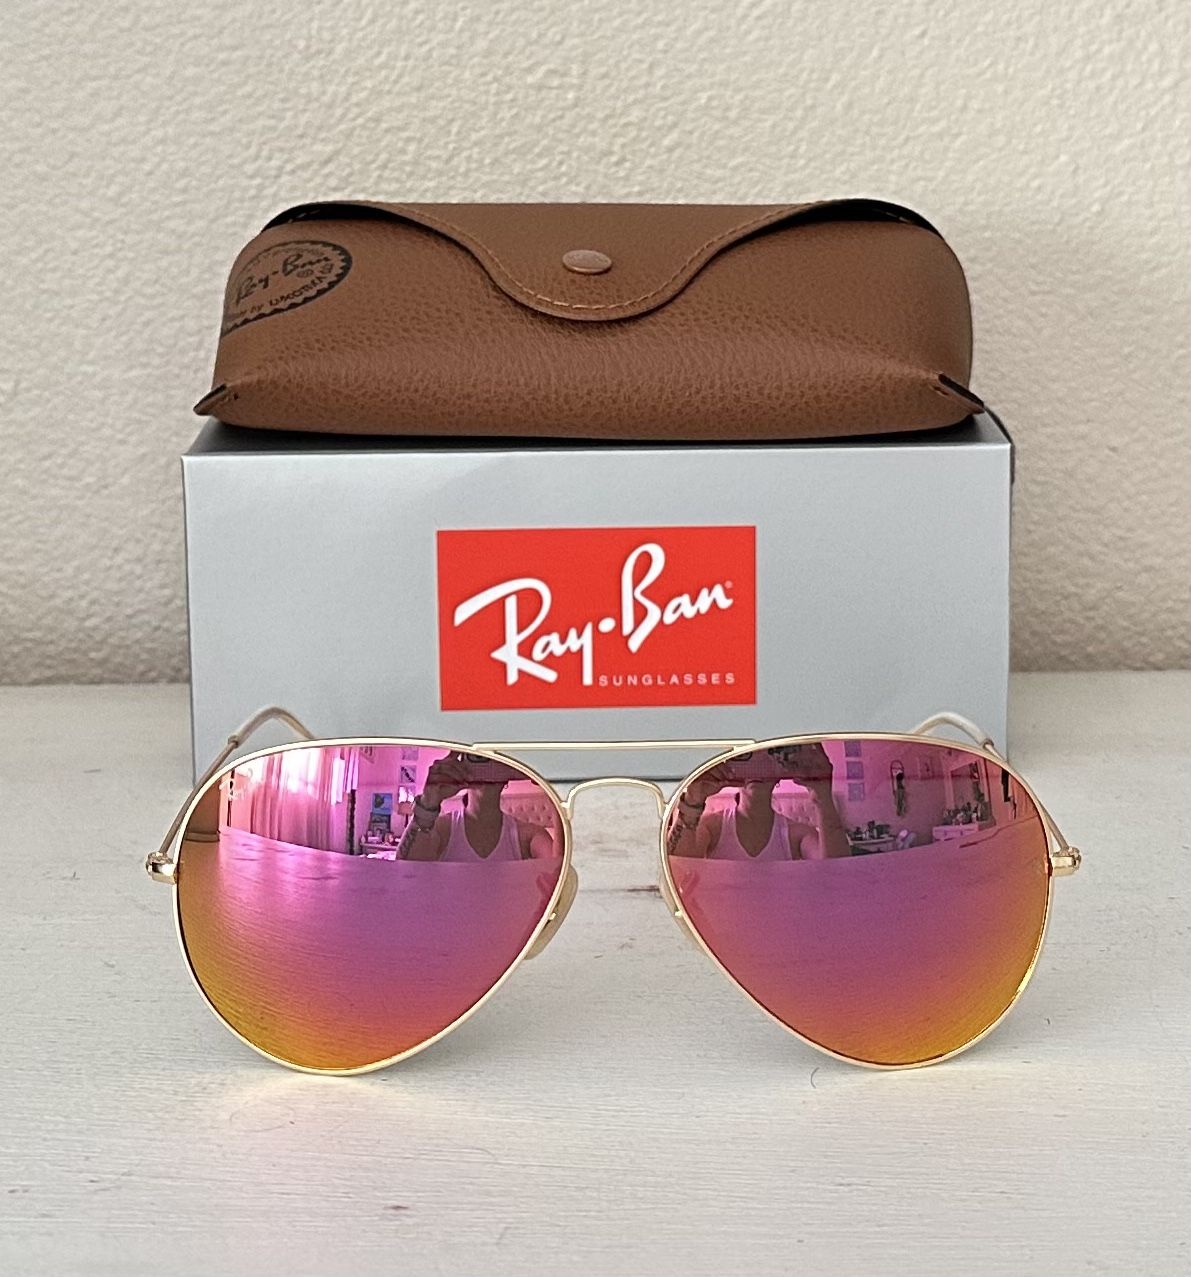 New RayBan Aviator Pink Sunglasses (Mother’s Day Gift Idea)